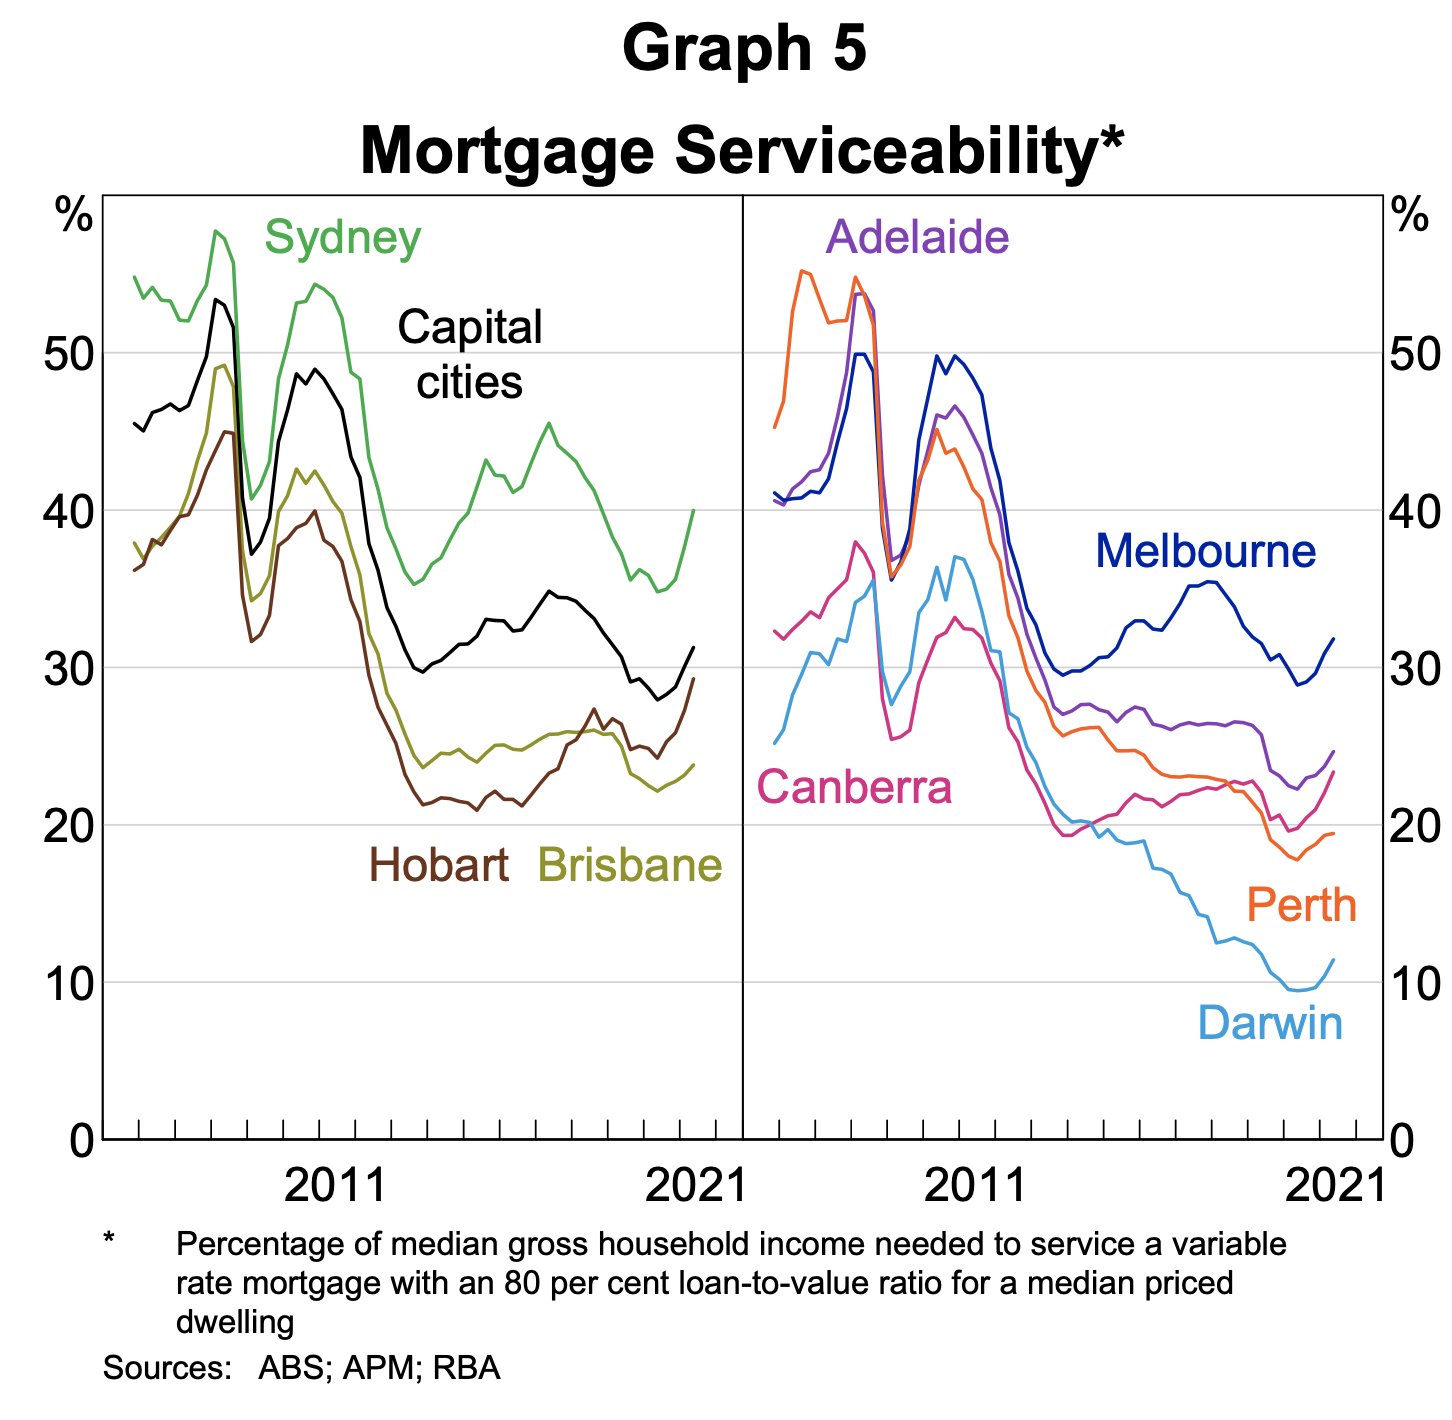 Mortgage Serviceability